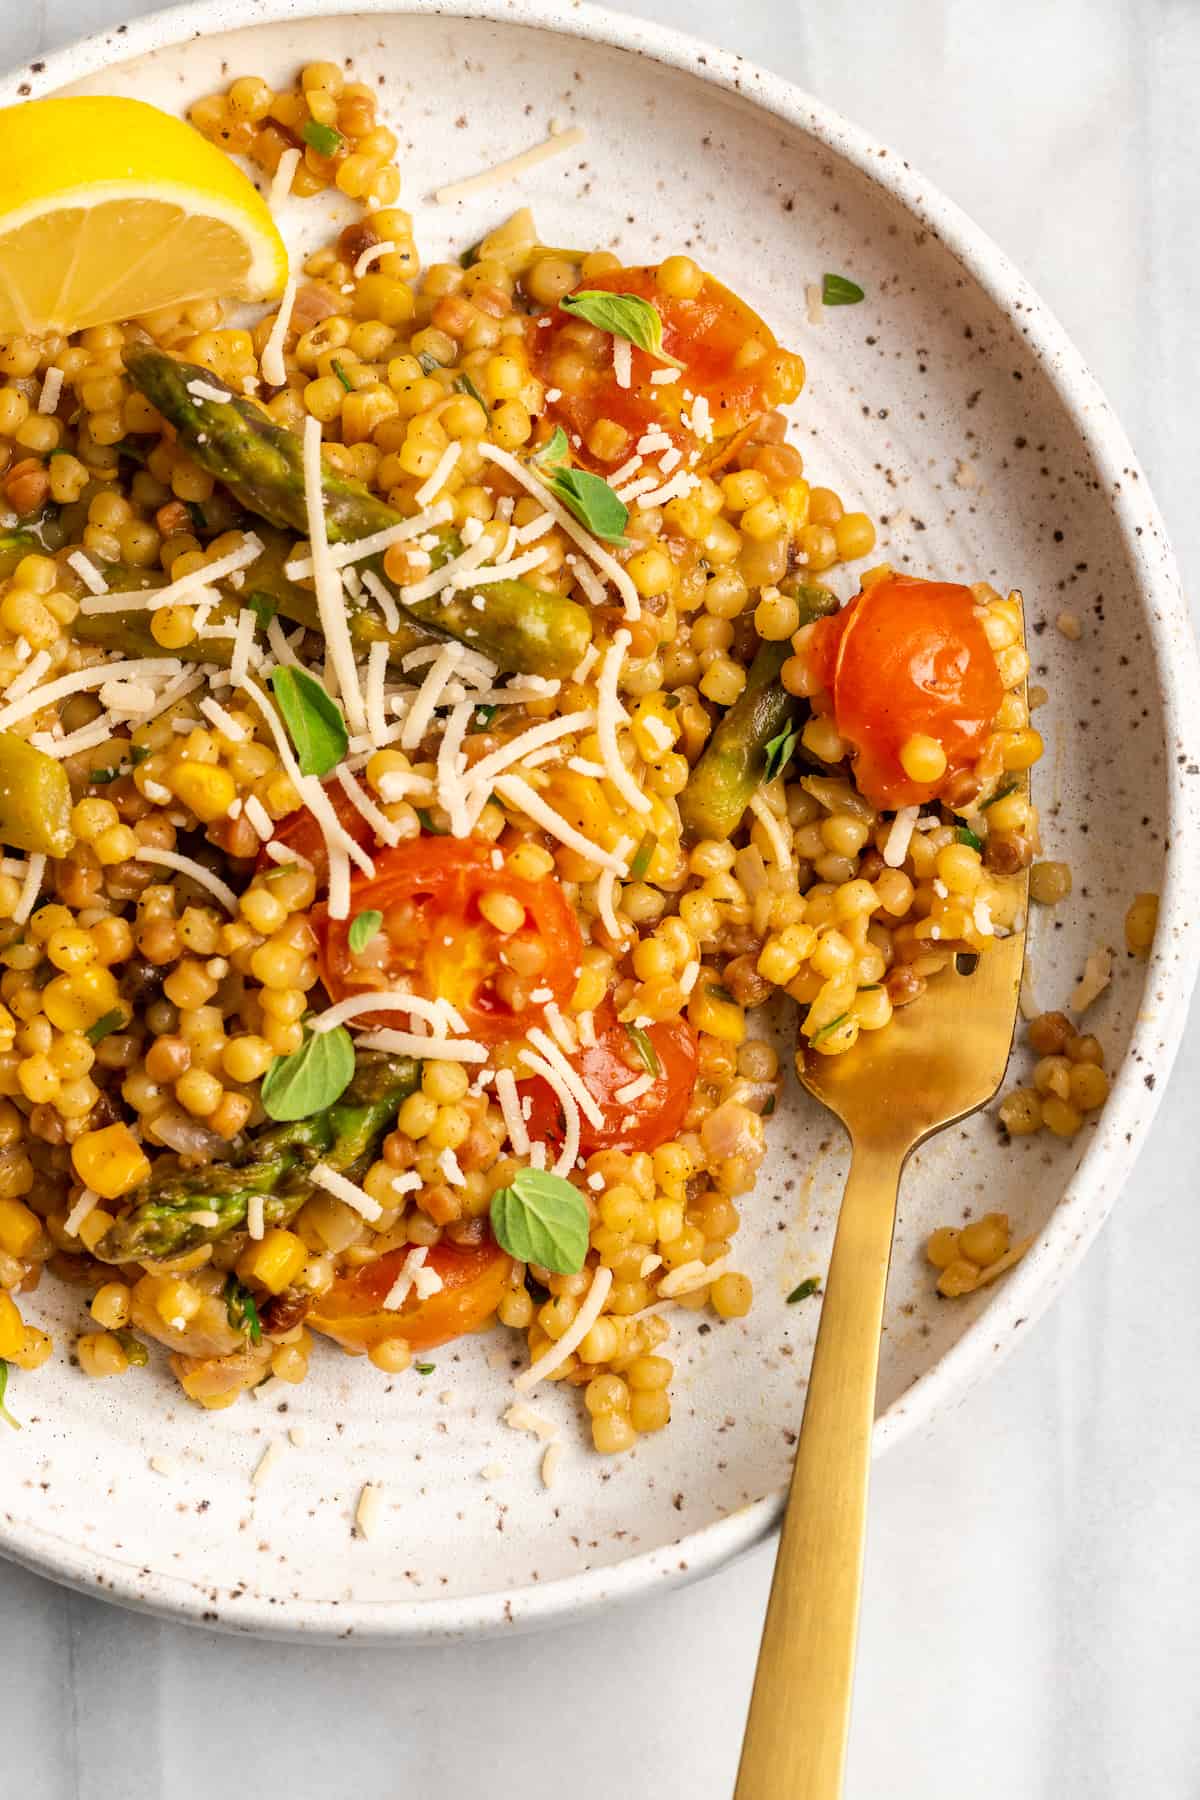 Overhead view of vegan fregola on plate with fork